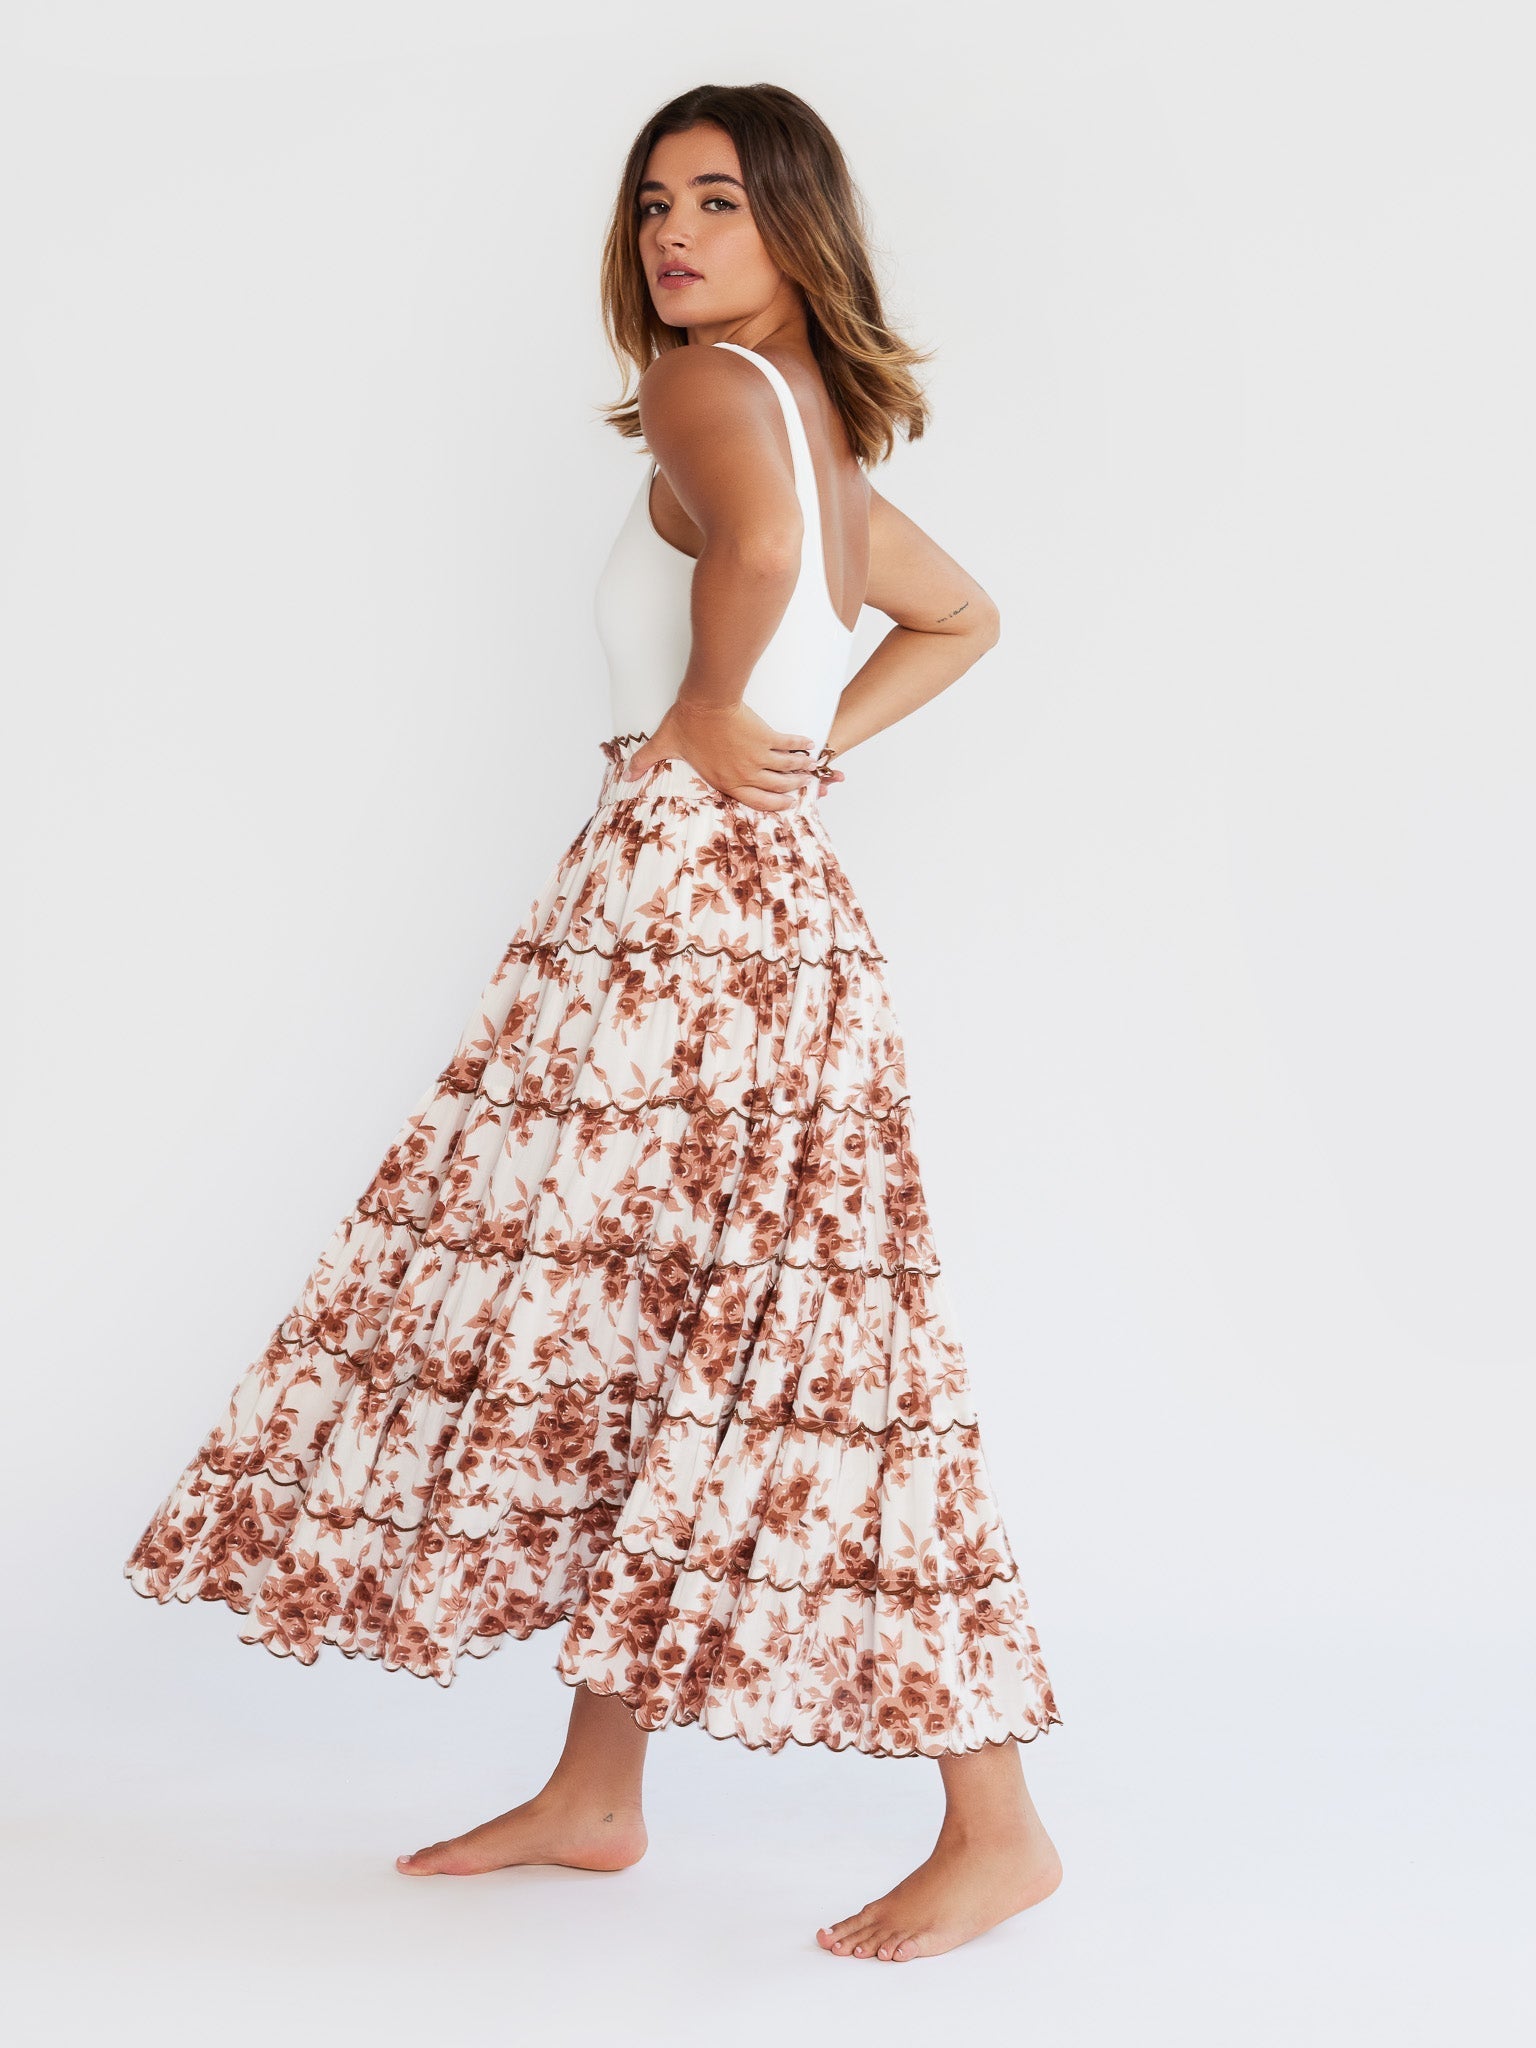 MILLE Clothing Odette Skirt in Cafe Bouquet